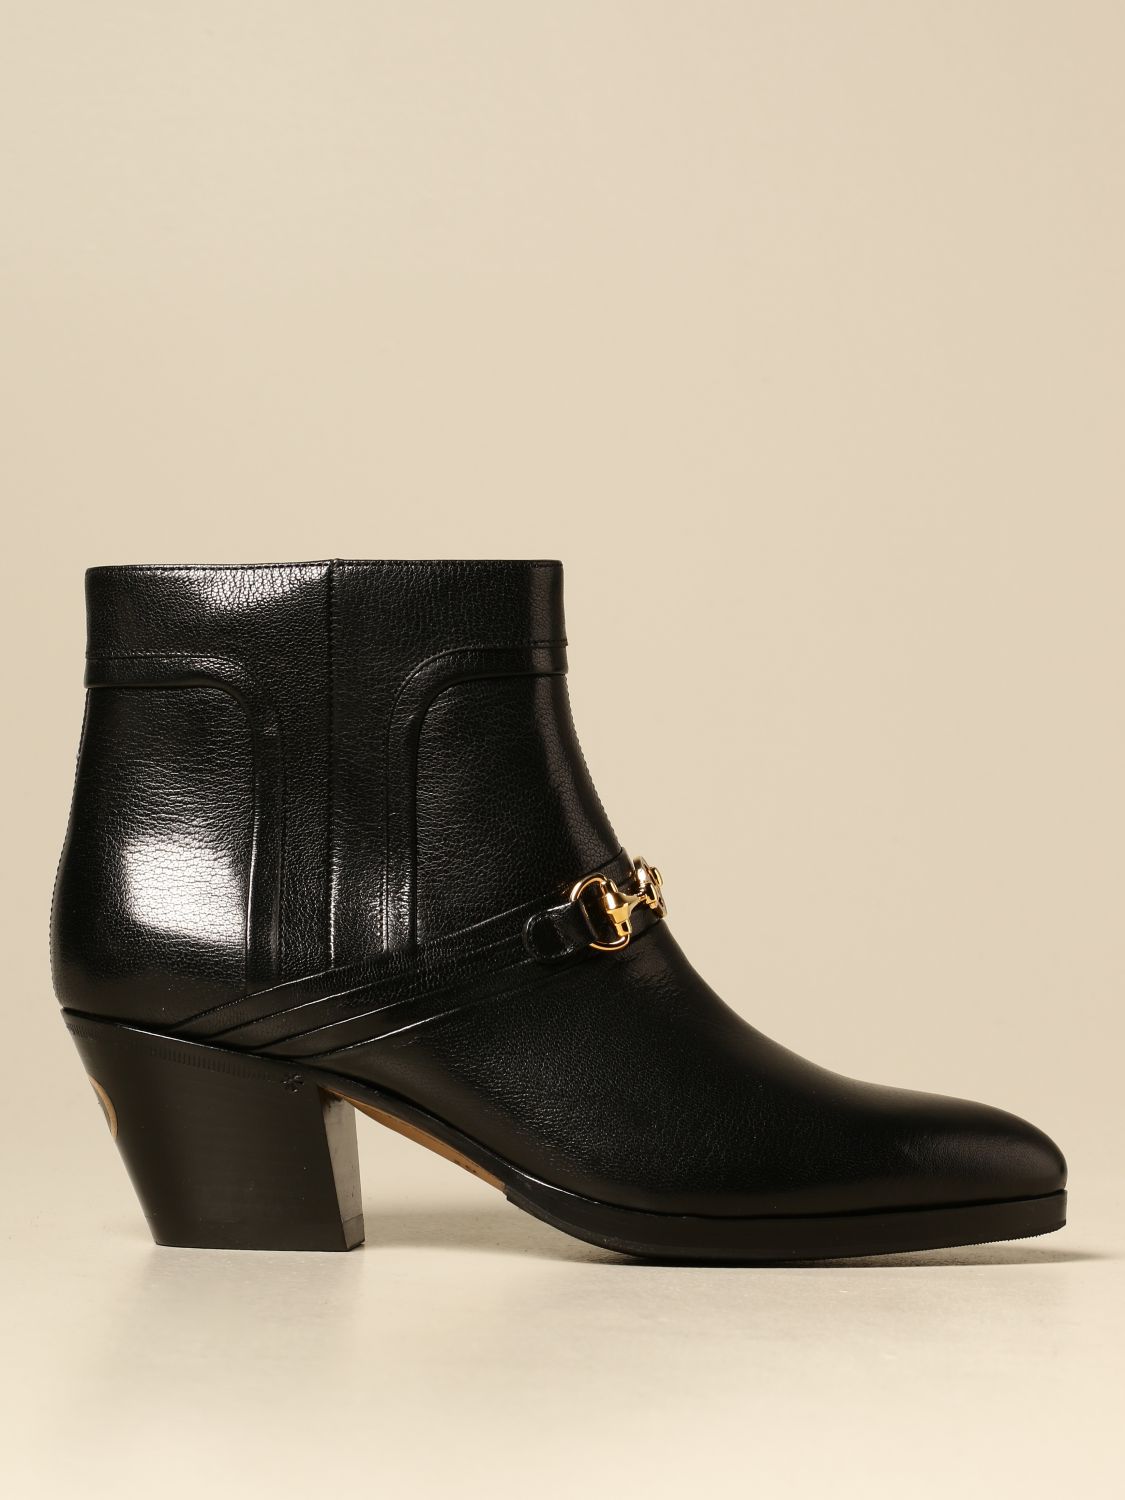 gucci women's black leather ankle boots